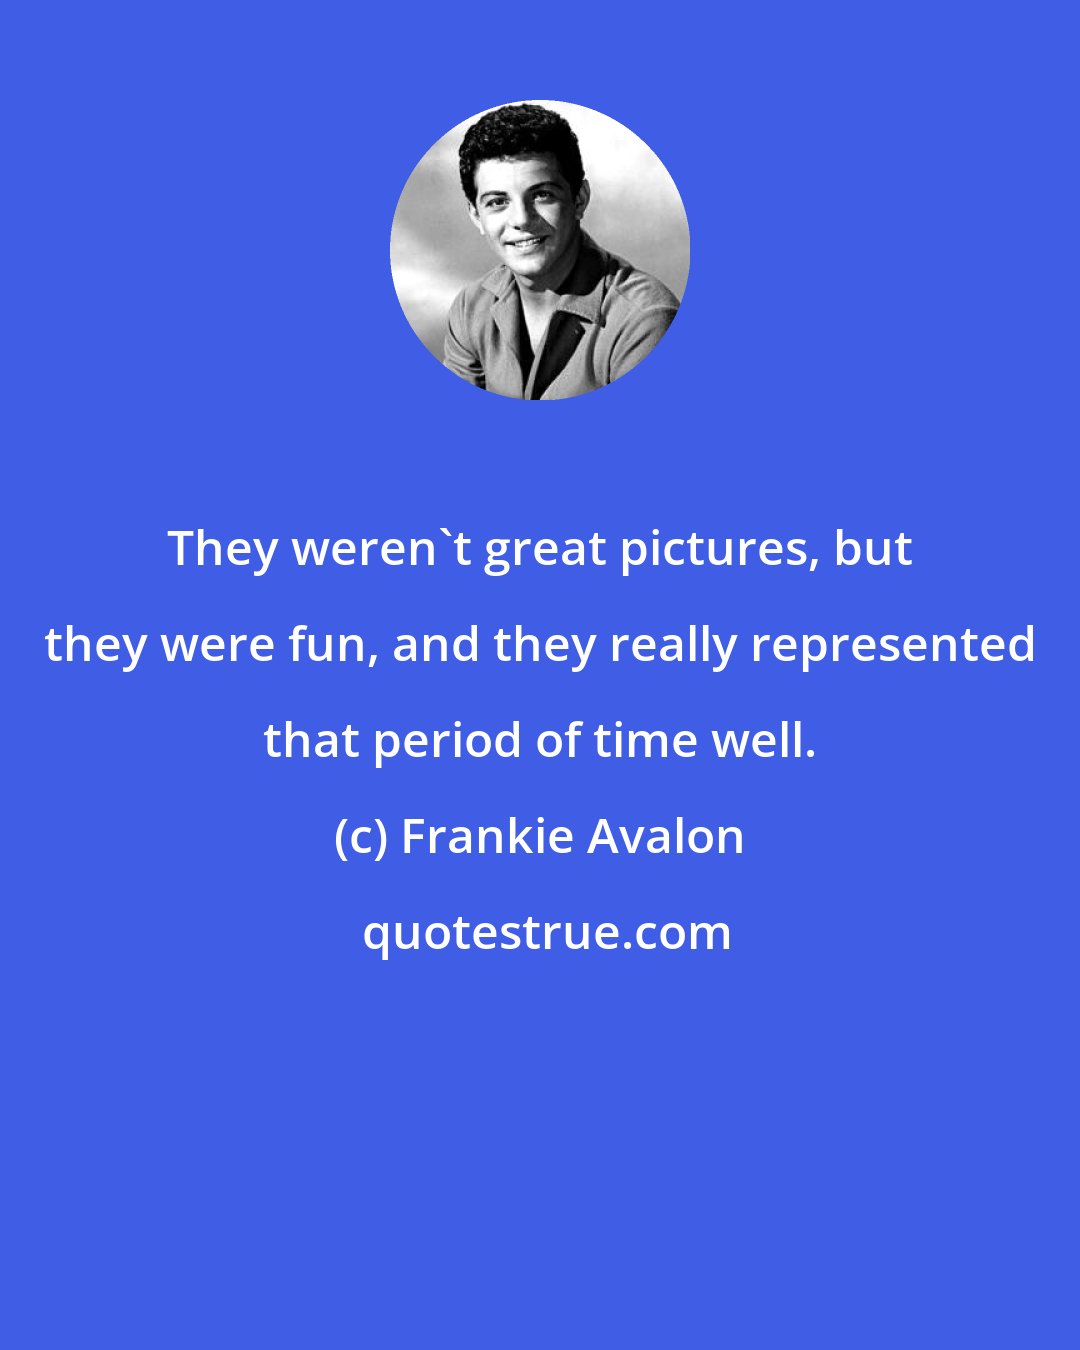 Frankie Avalon: They weren't great pictures, but they were fun, and they really represented that period of time well.